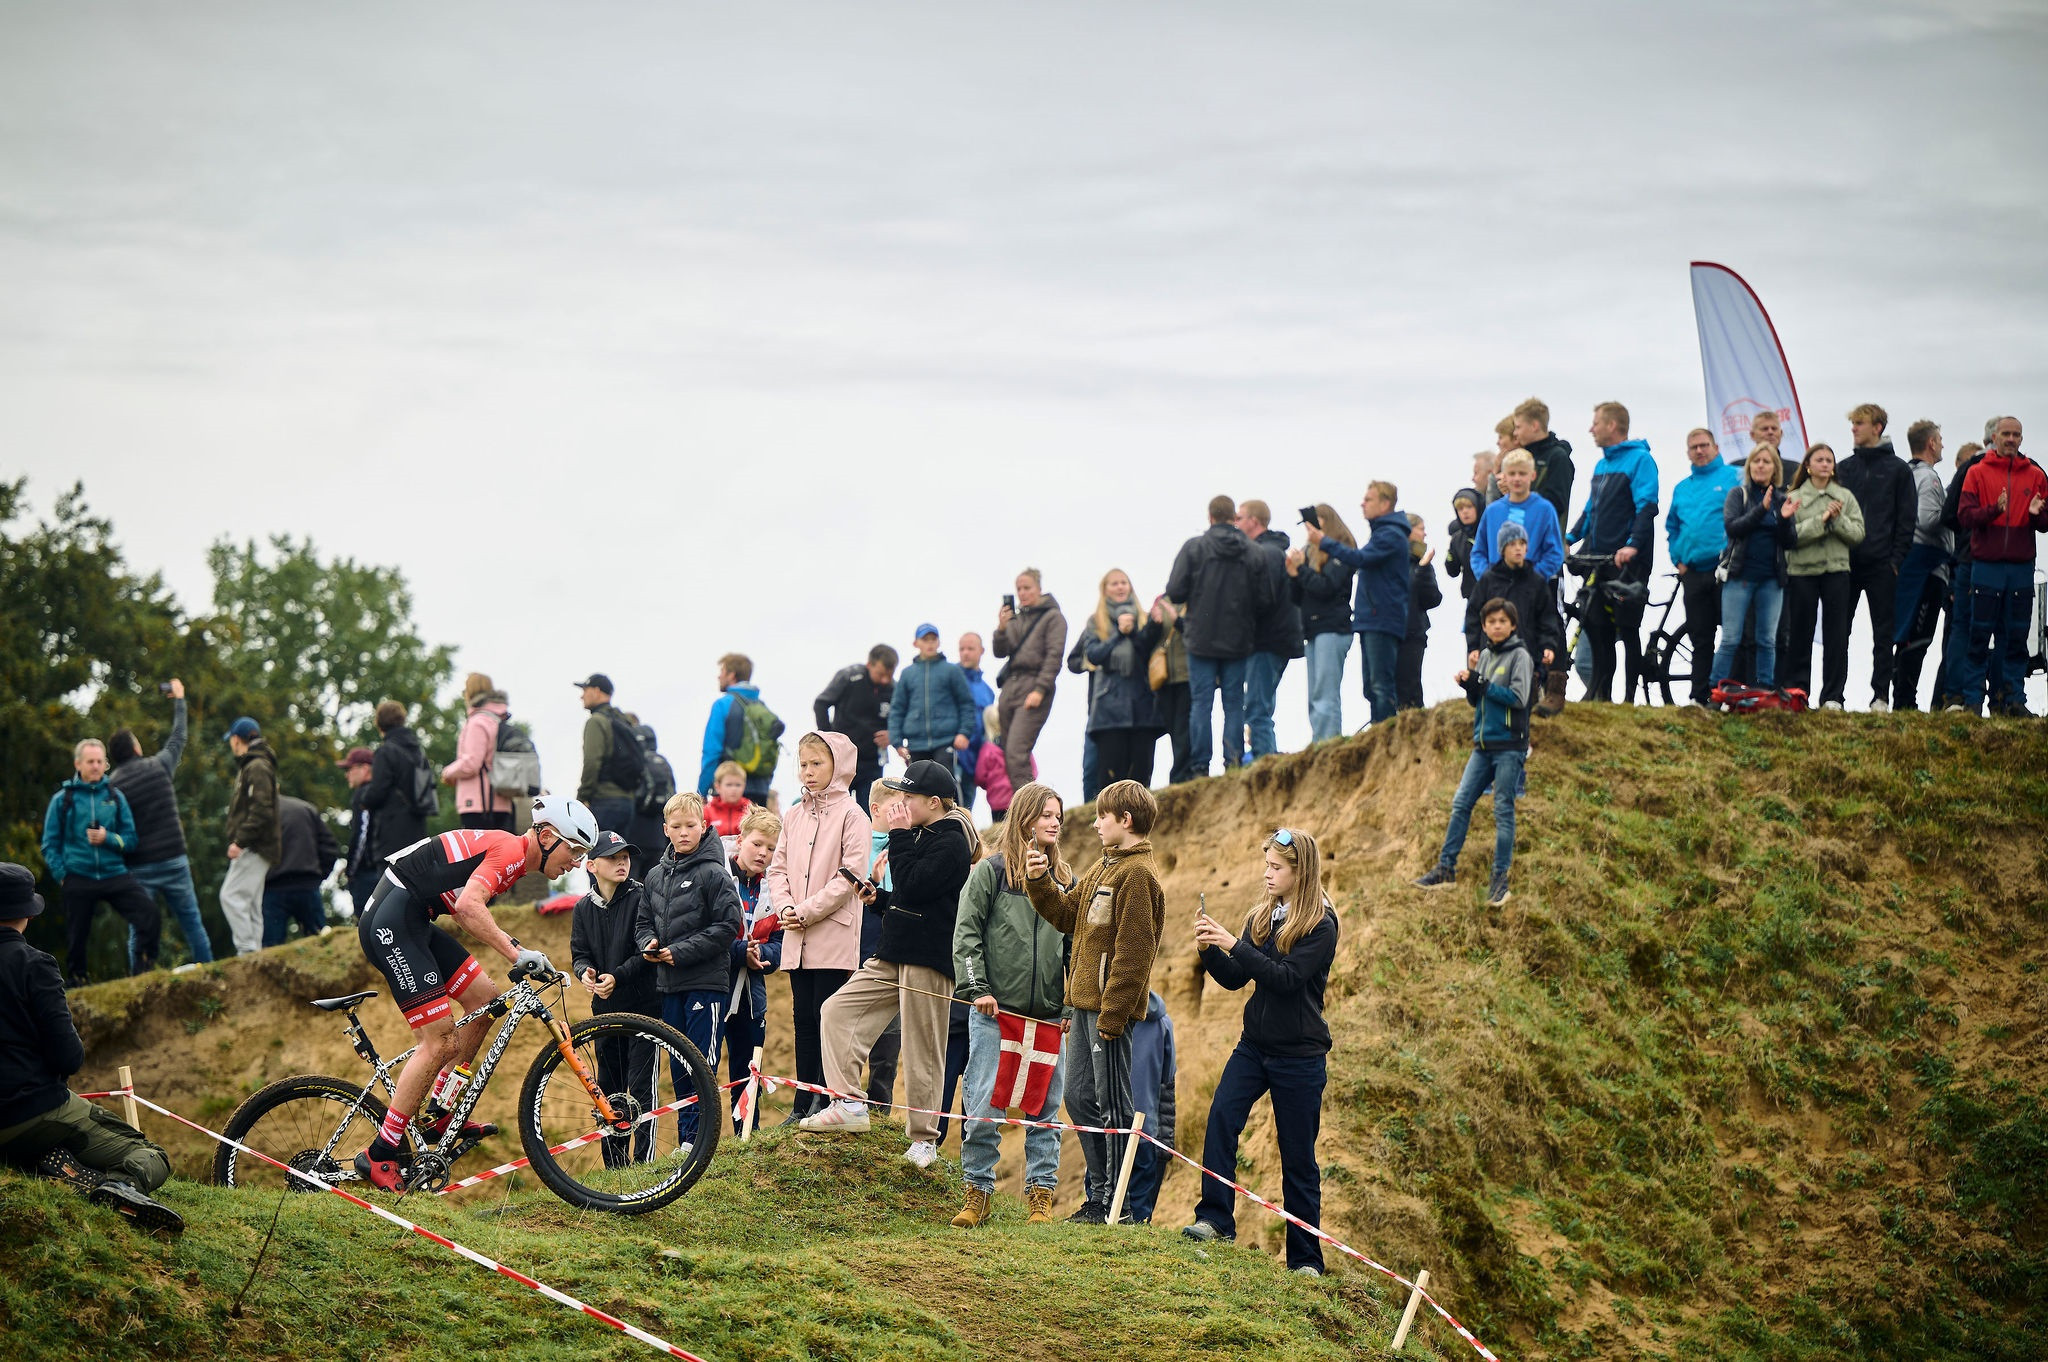 Thousands of people lined the route to watch the races unfold ©Ard Jongsma (Triangle Region)